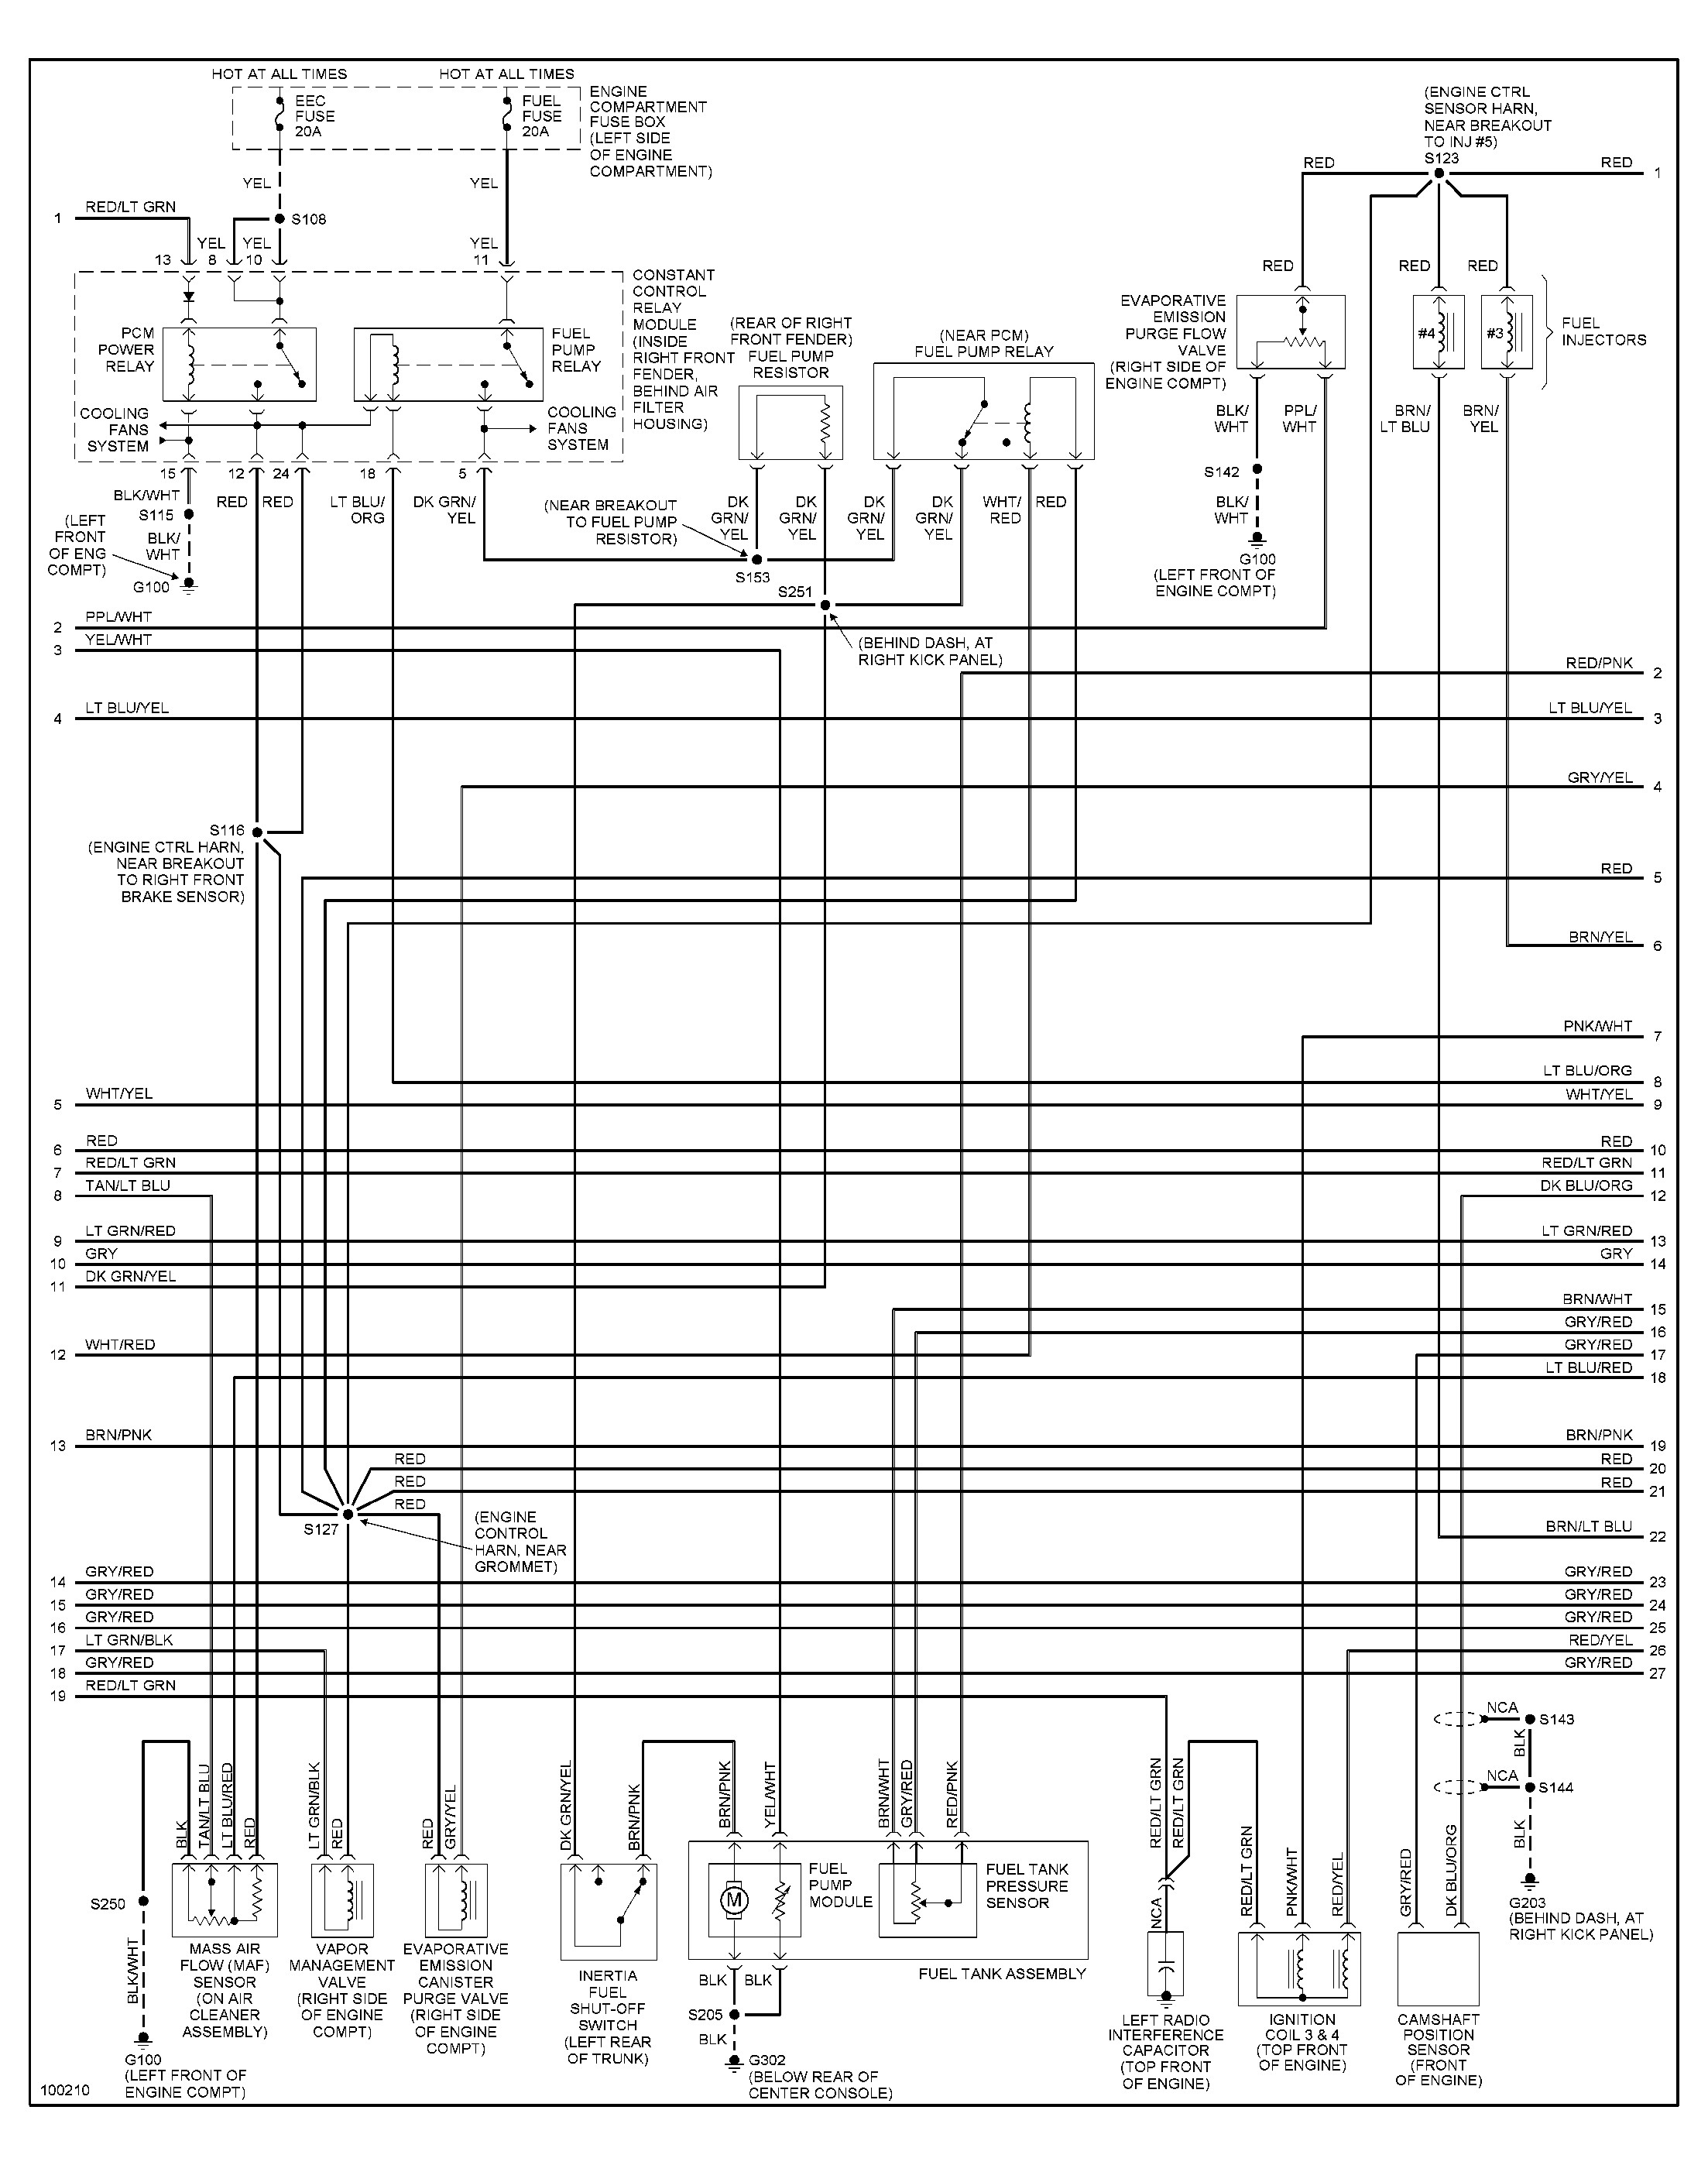 2007 ford Escape Engine Diagram ford Mustang Gt 98 Fuel Pump Not Working Tried Checking at 1998 Of 2007 ford Escape Engine Diagram